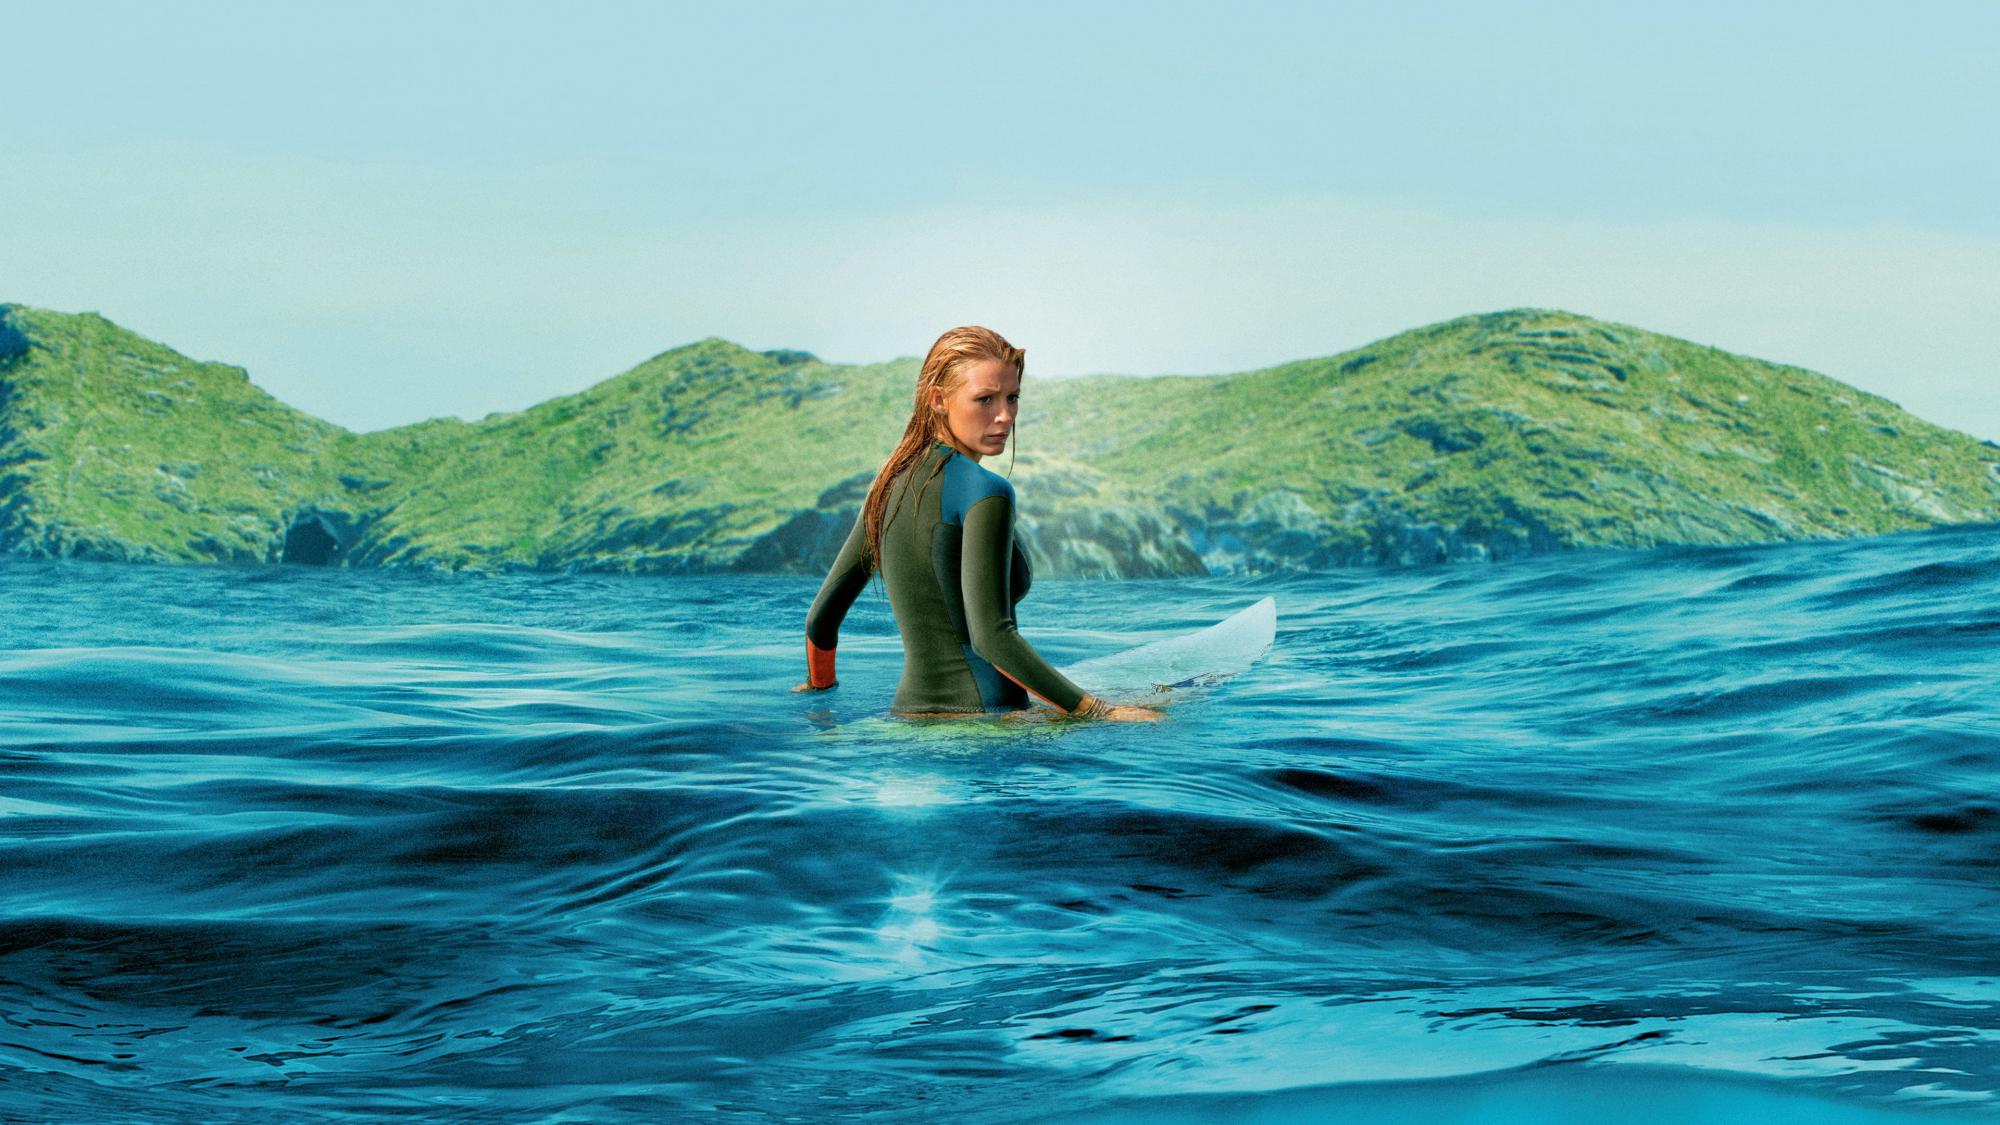 Backdrop Image for The Shallows